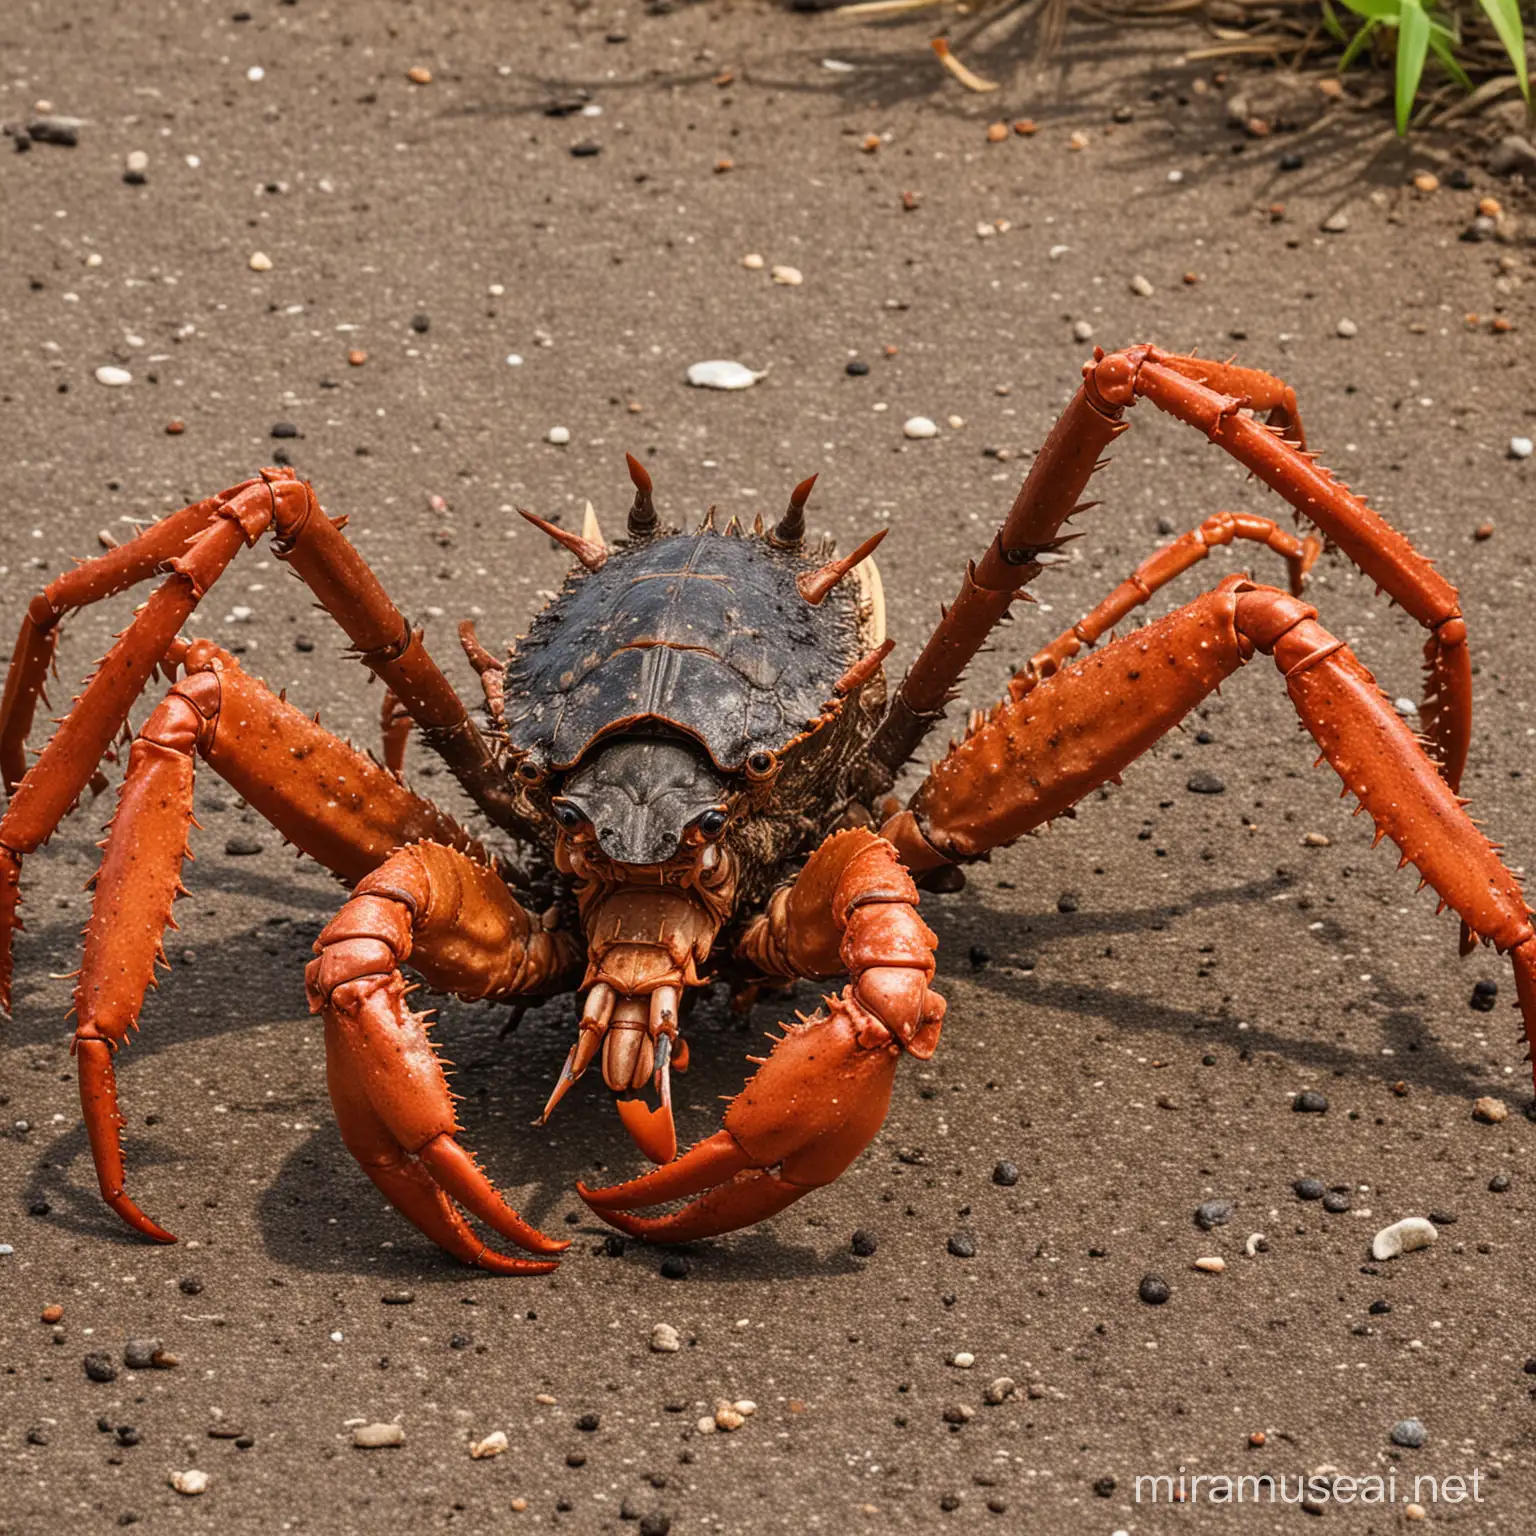 a coconut crab with lobster pincers